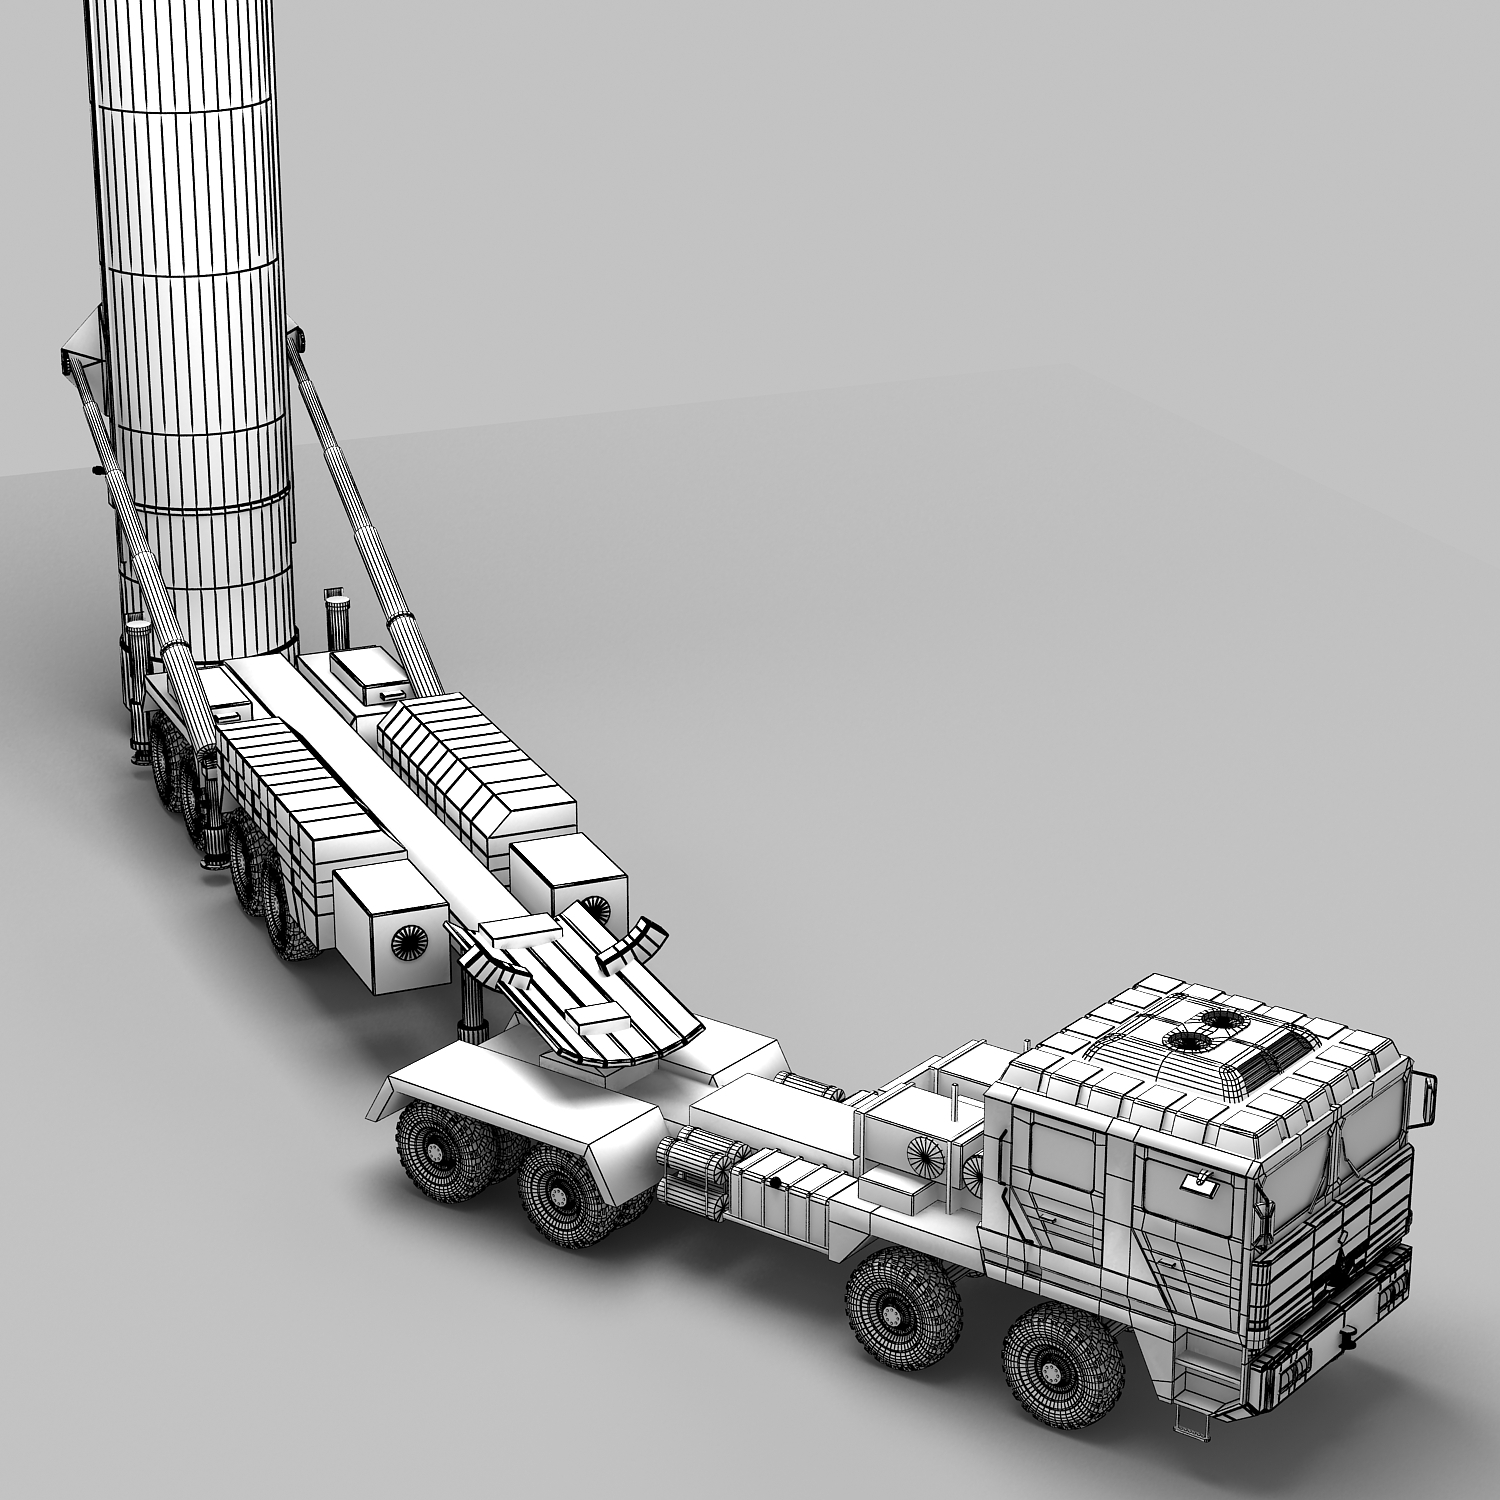 Chinese df-31 missile rocket 3D model - TurboSquid 1205831